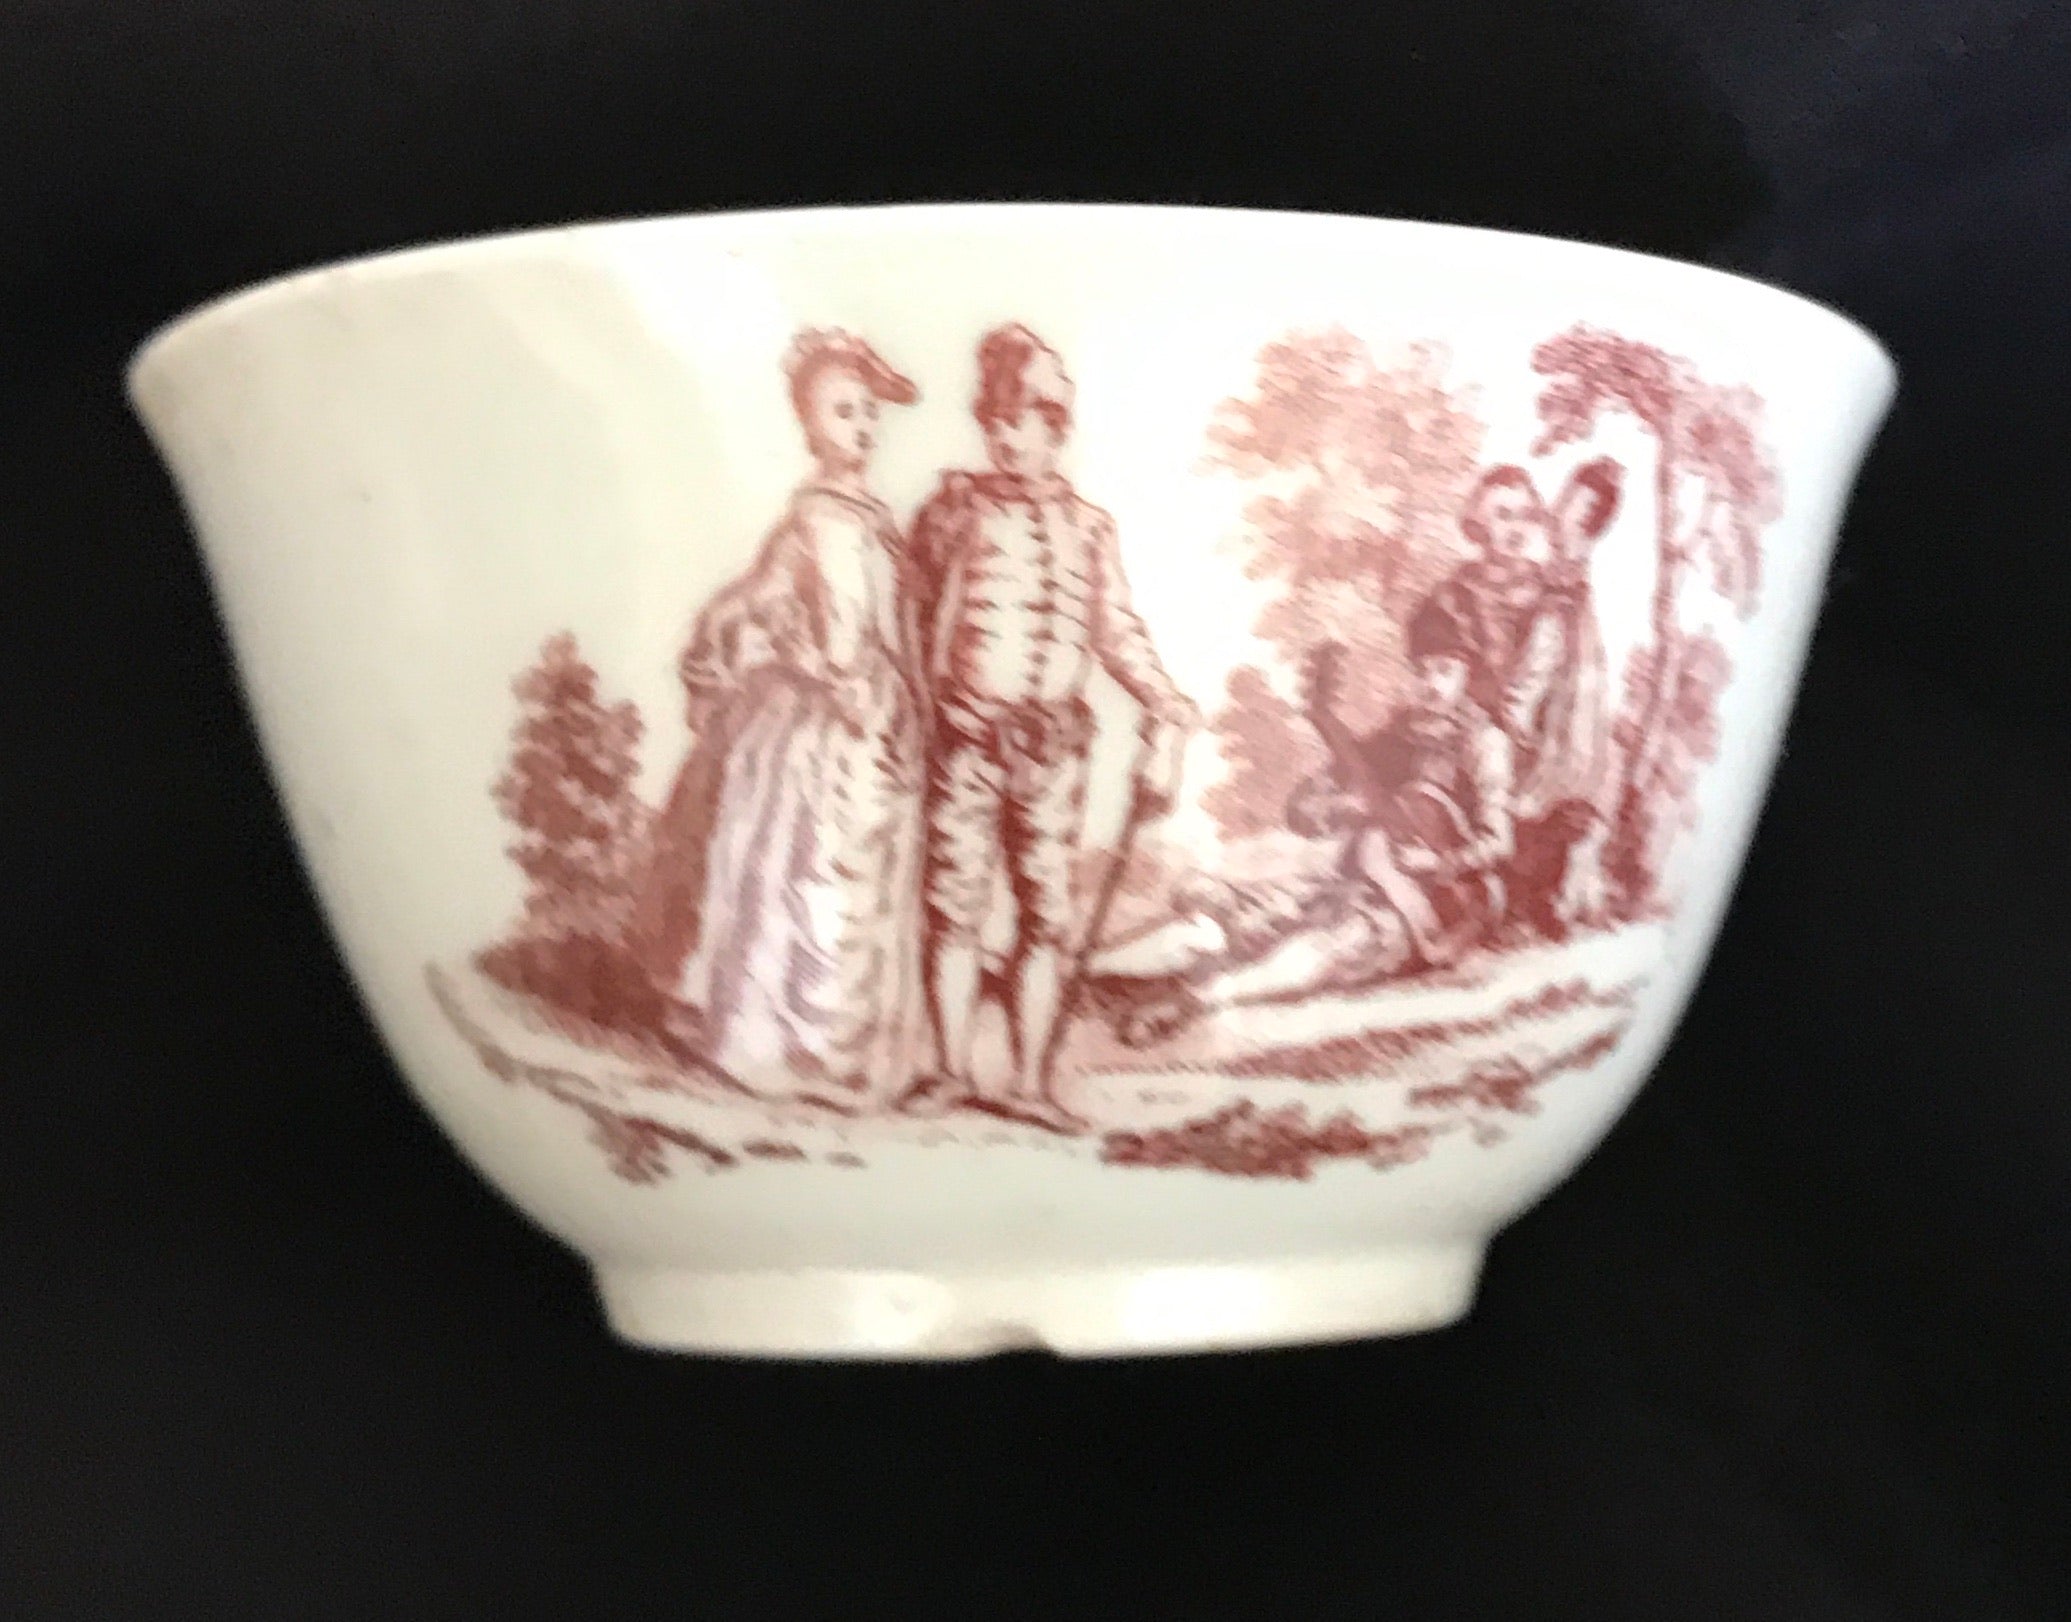 18th Century Worcester Porcelain Teabowl Transfer-Printed in Red.